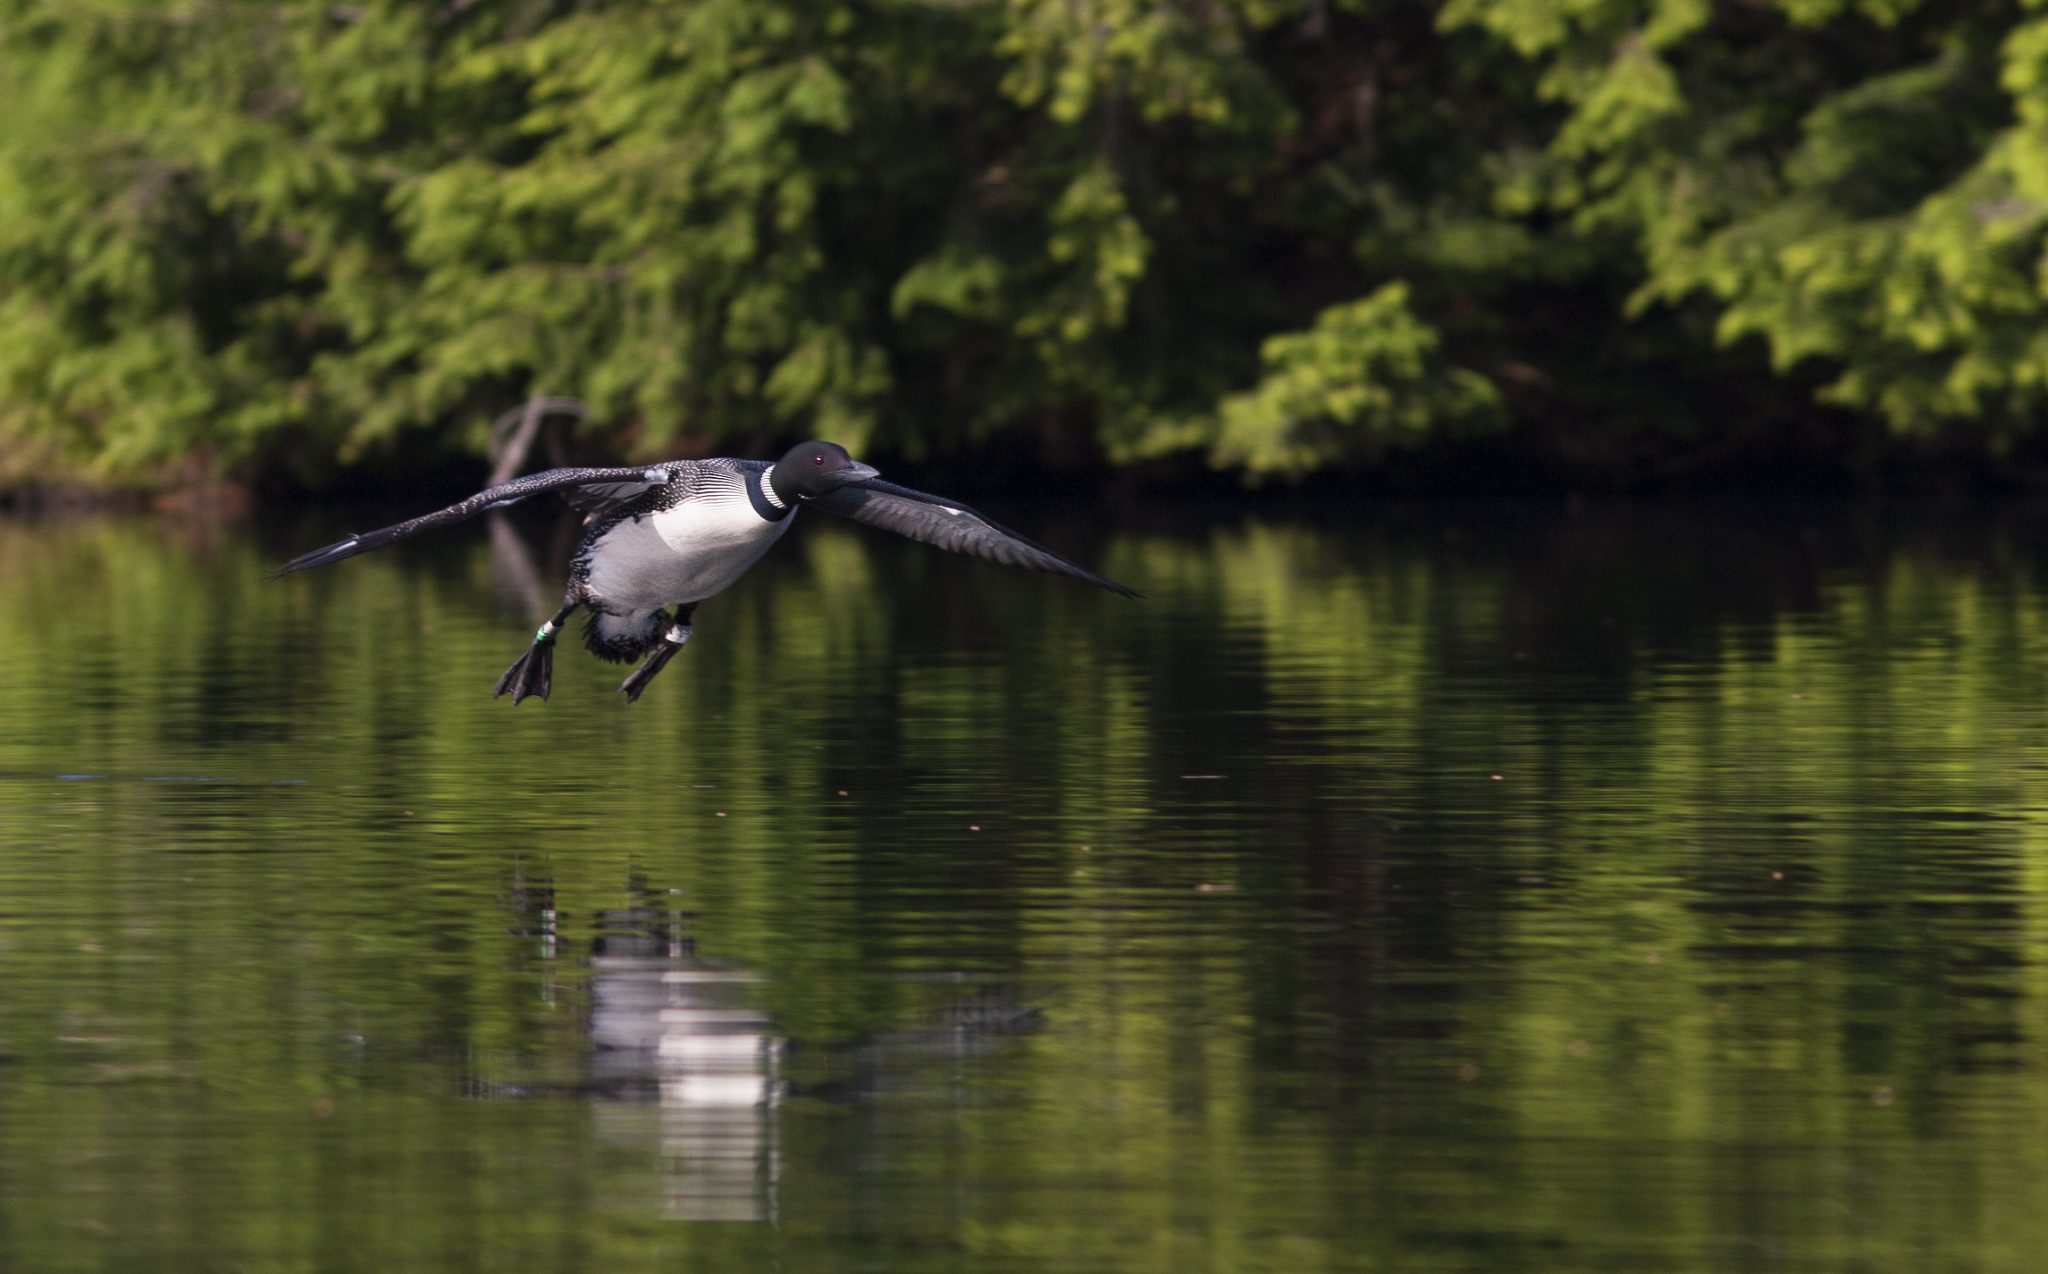 A black and white loon takes flight from a calm body of water.